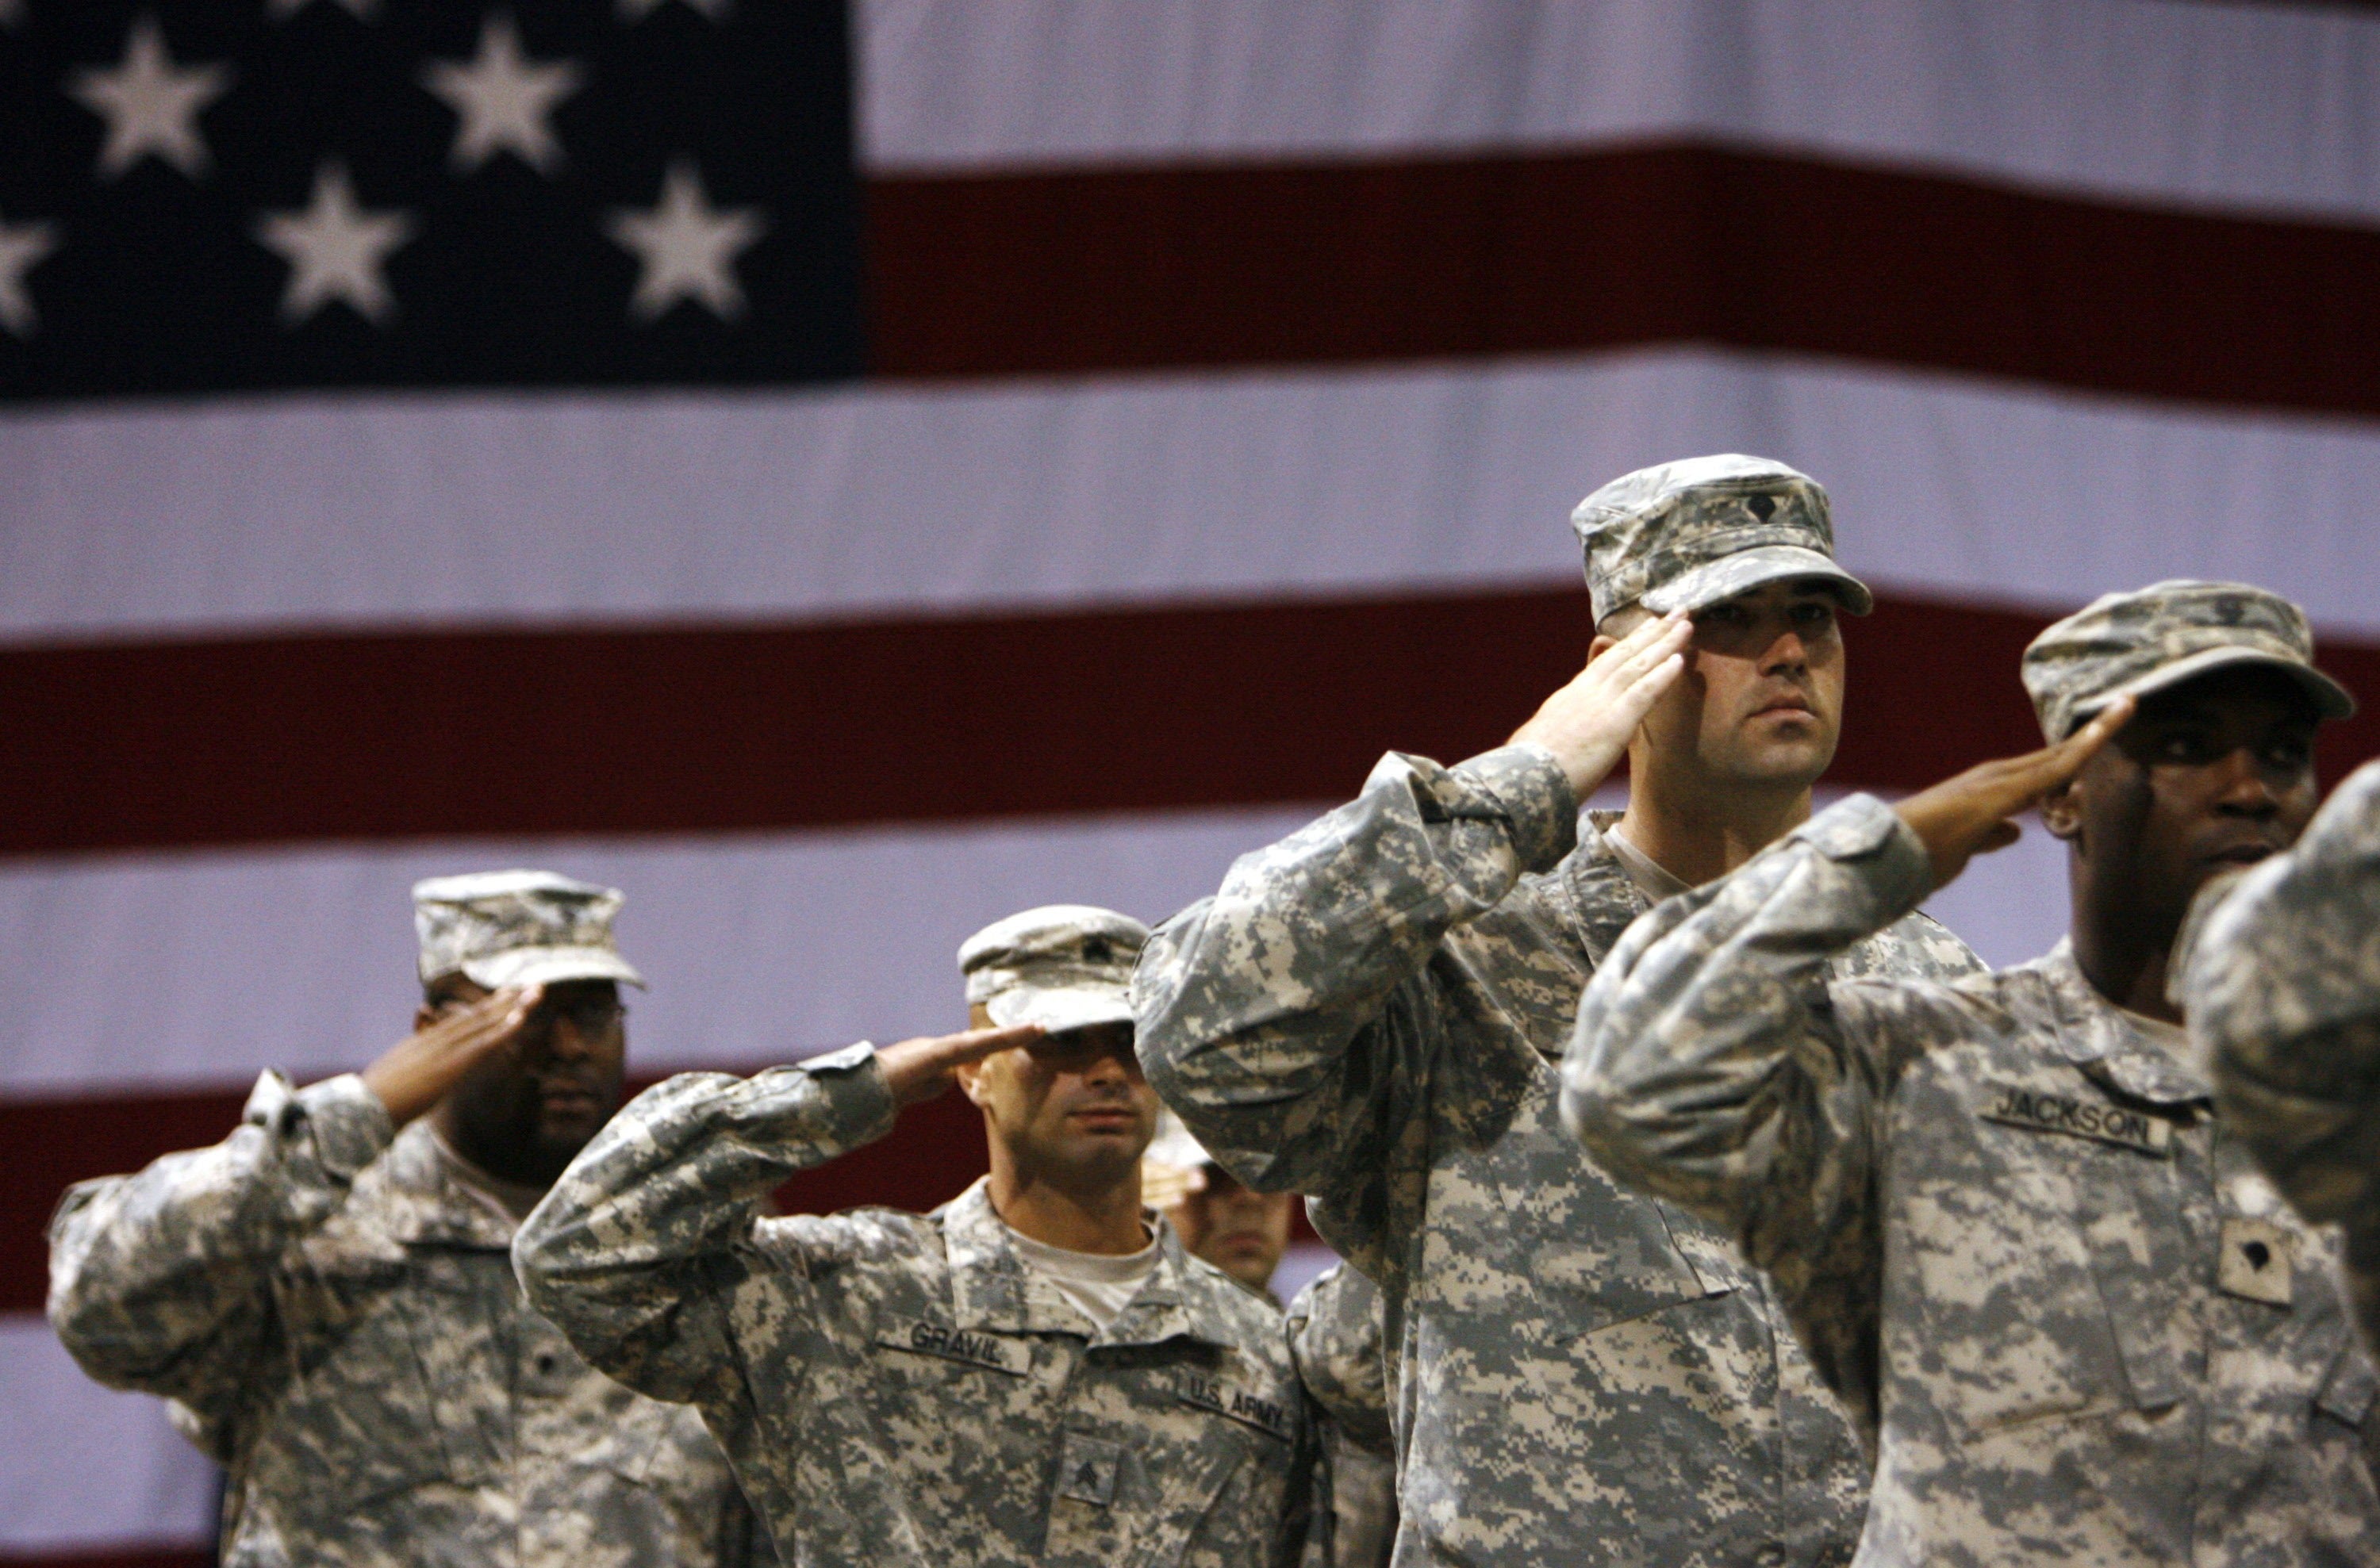 US Army Research Office hope soldiers will be able to communicate silently on the battlefield